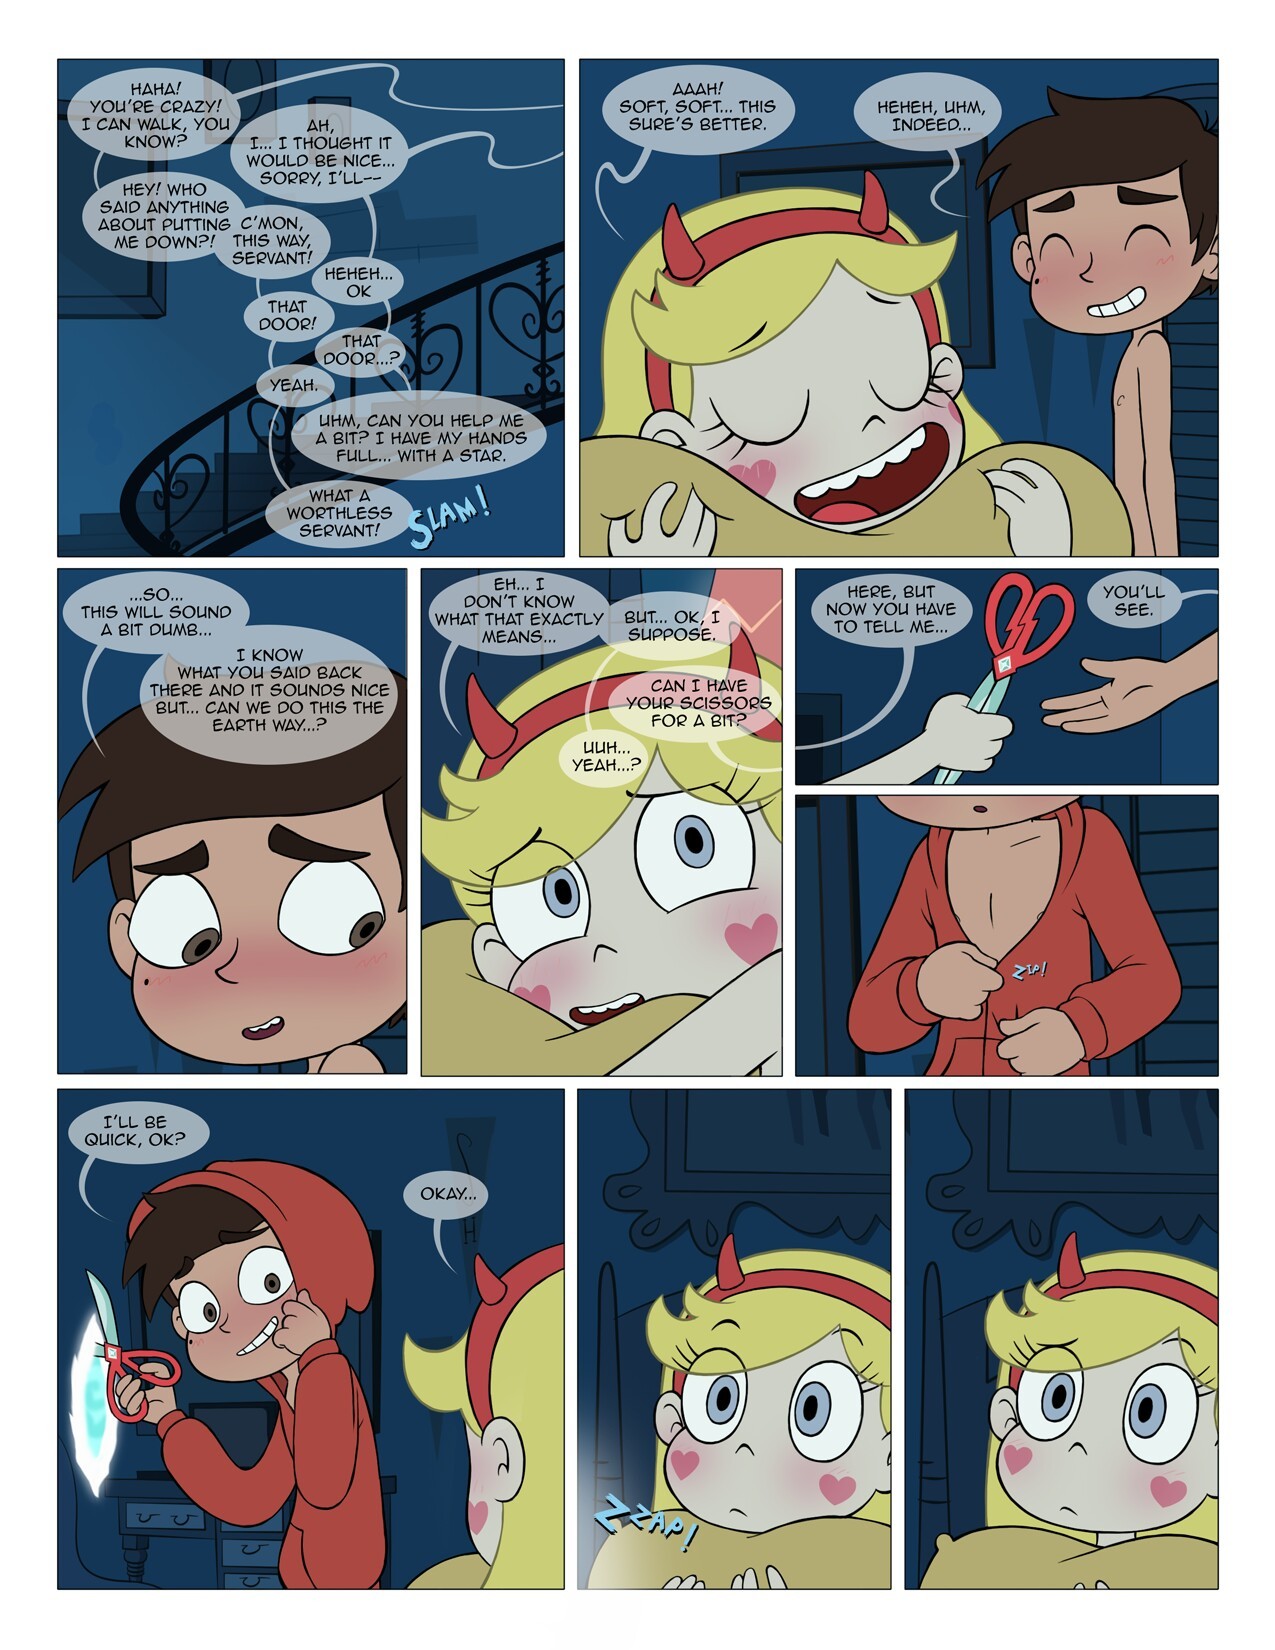 Star Vs The Forces of Cinnamon or How I Learned To Love The Starbomb.